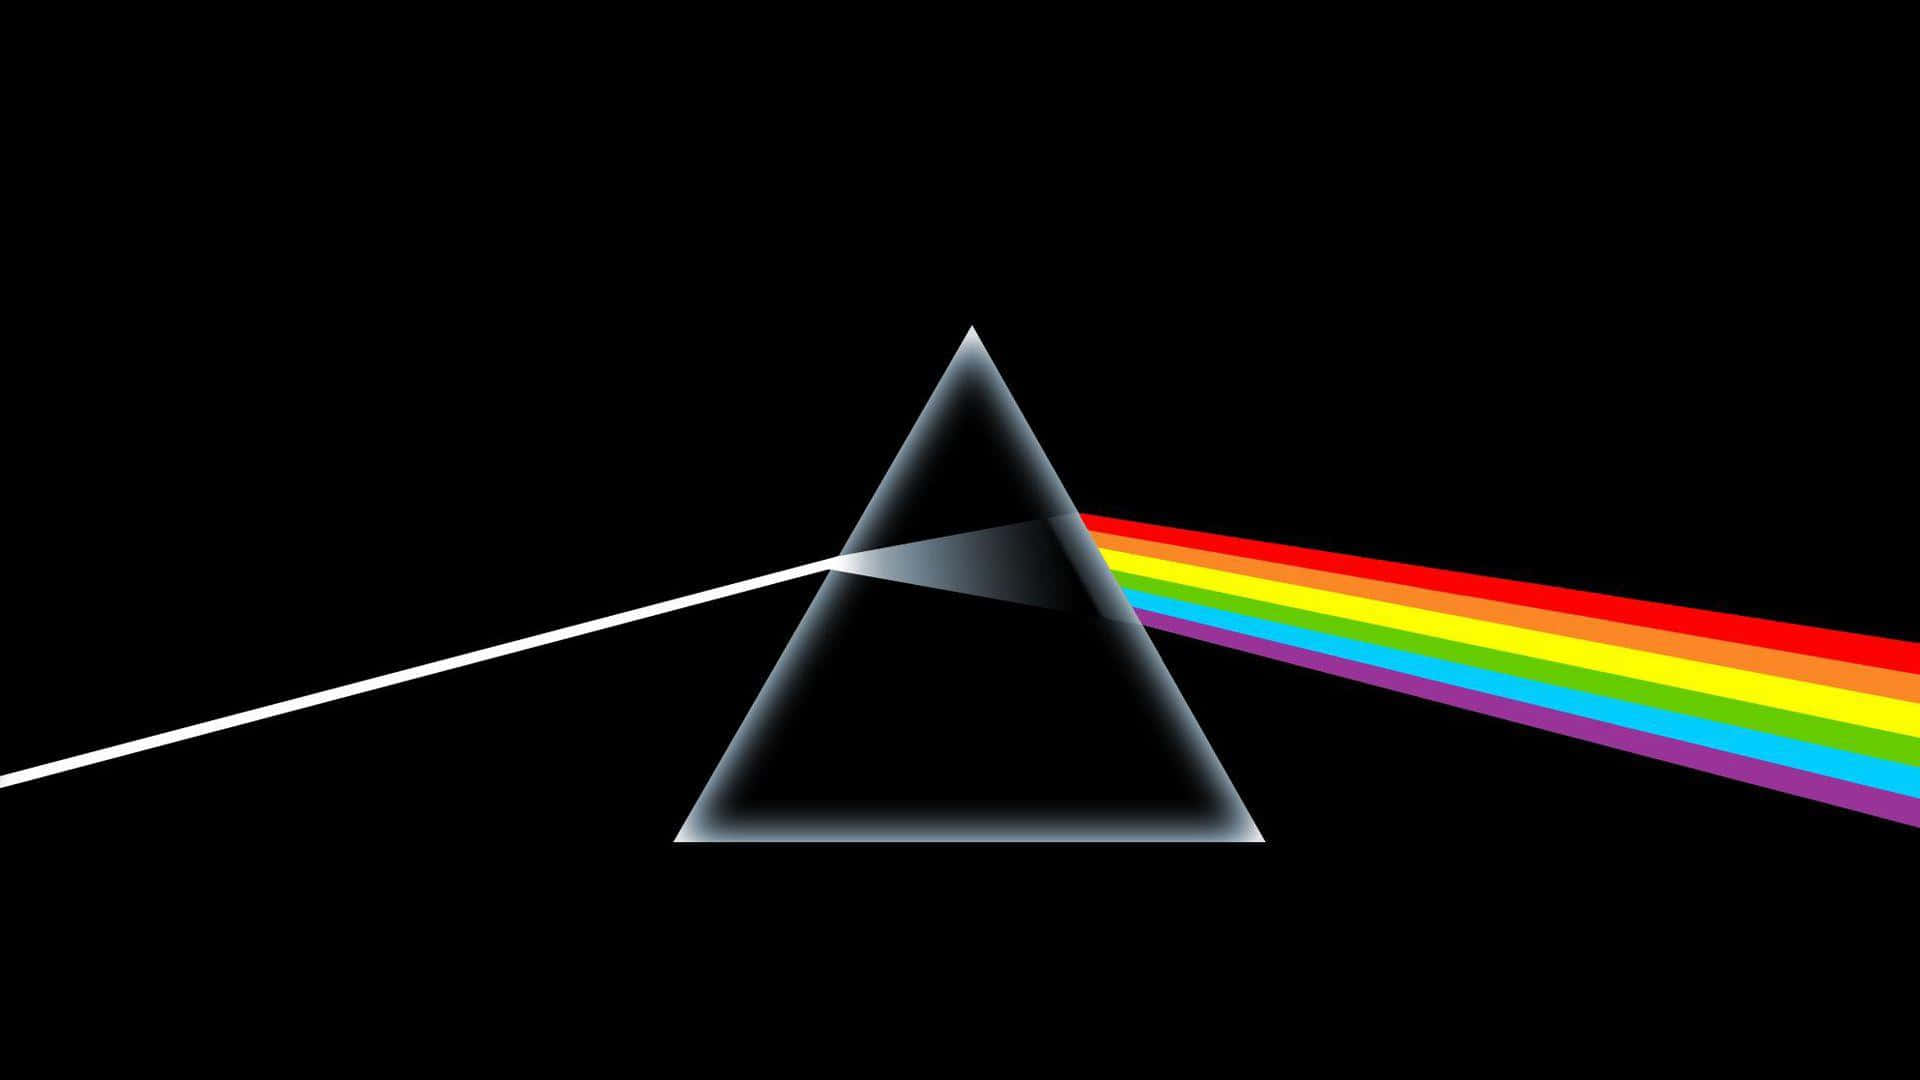 Dark Side Of The Moon: An Iconic Piece Of Music Wallpaper